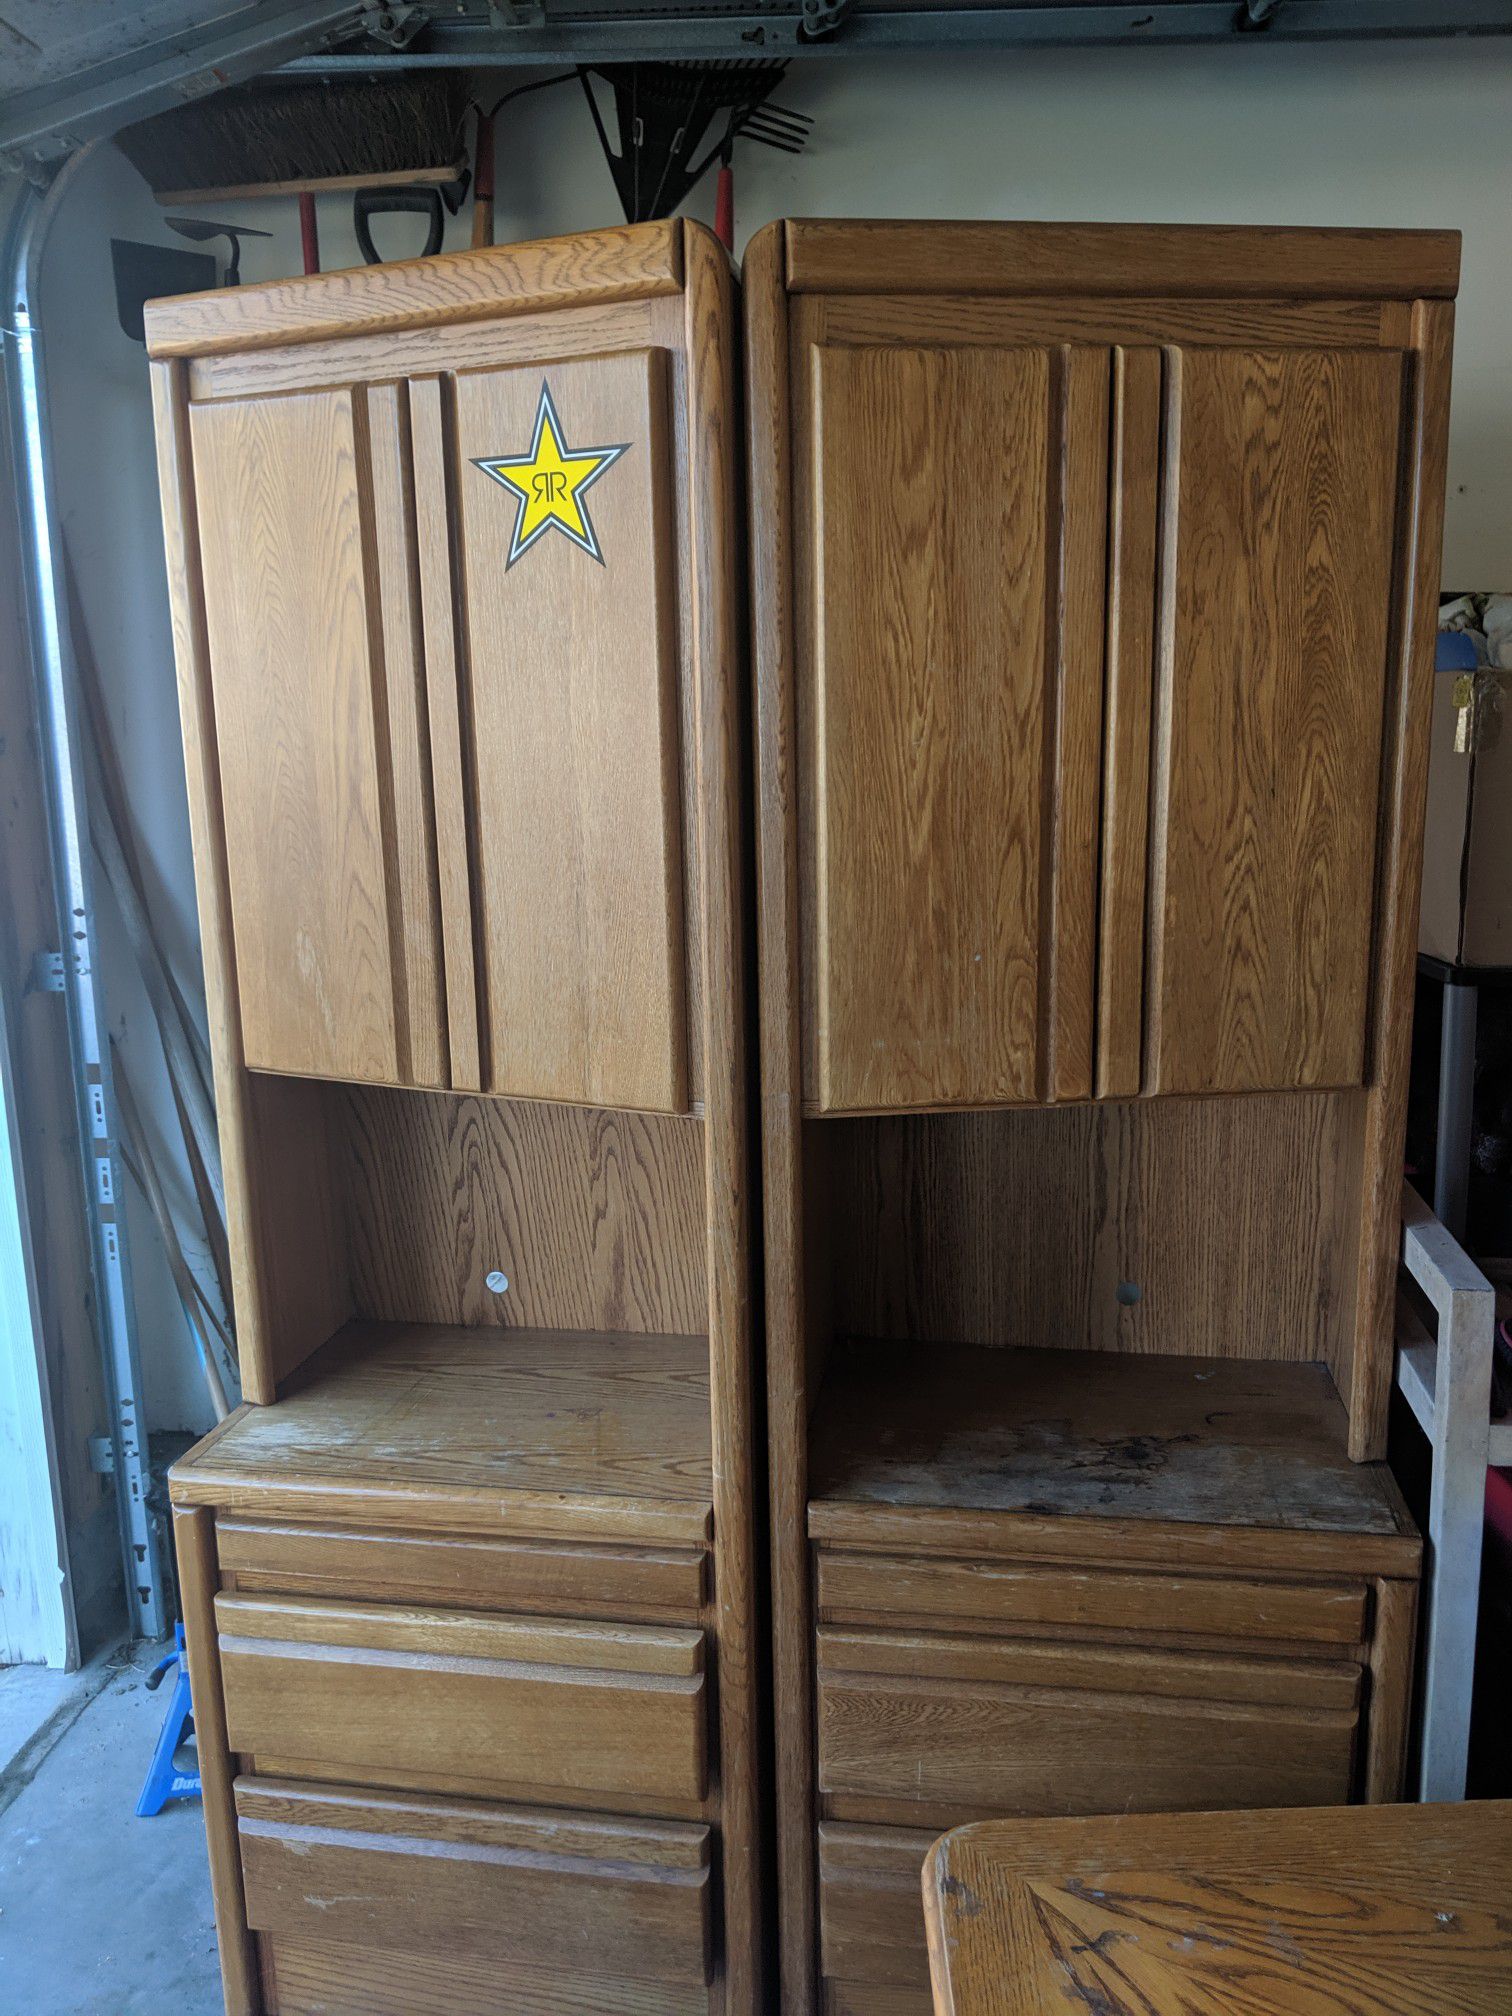 2 wooden cabinets/desk/drawers for bedroom. 2pc